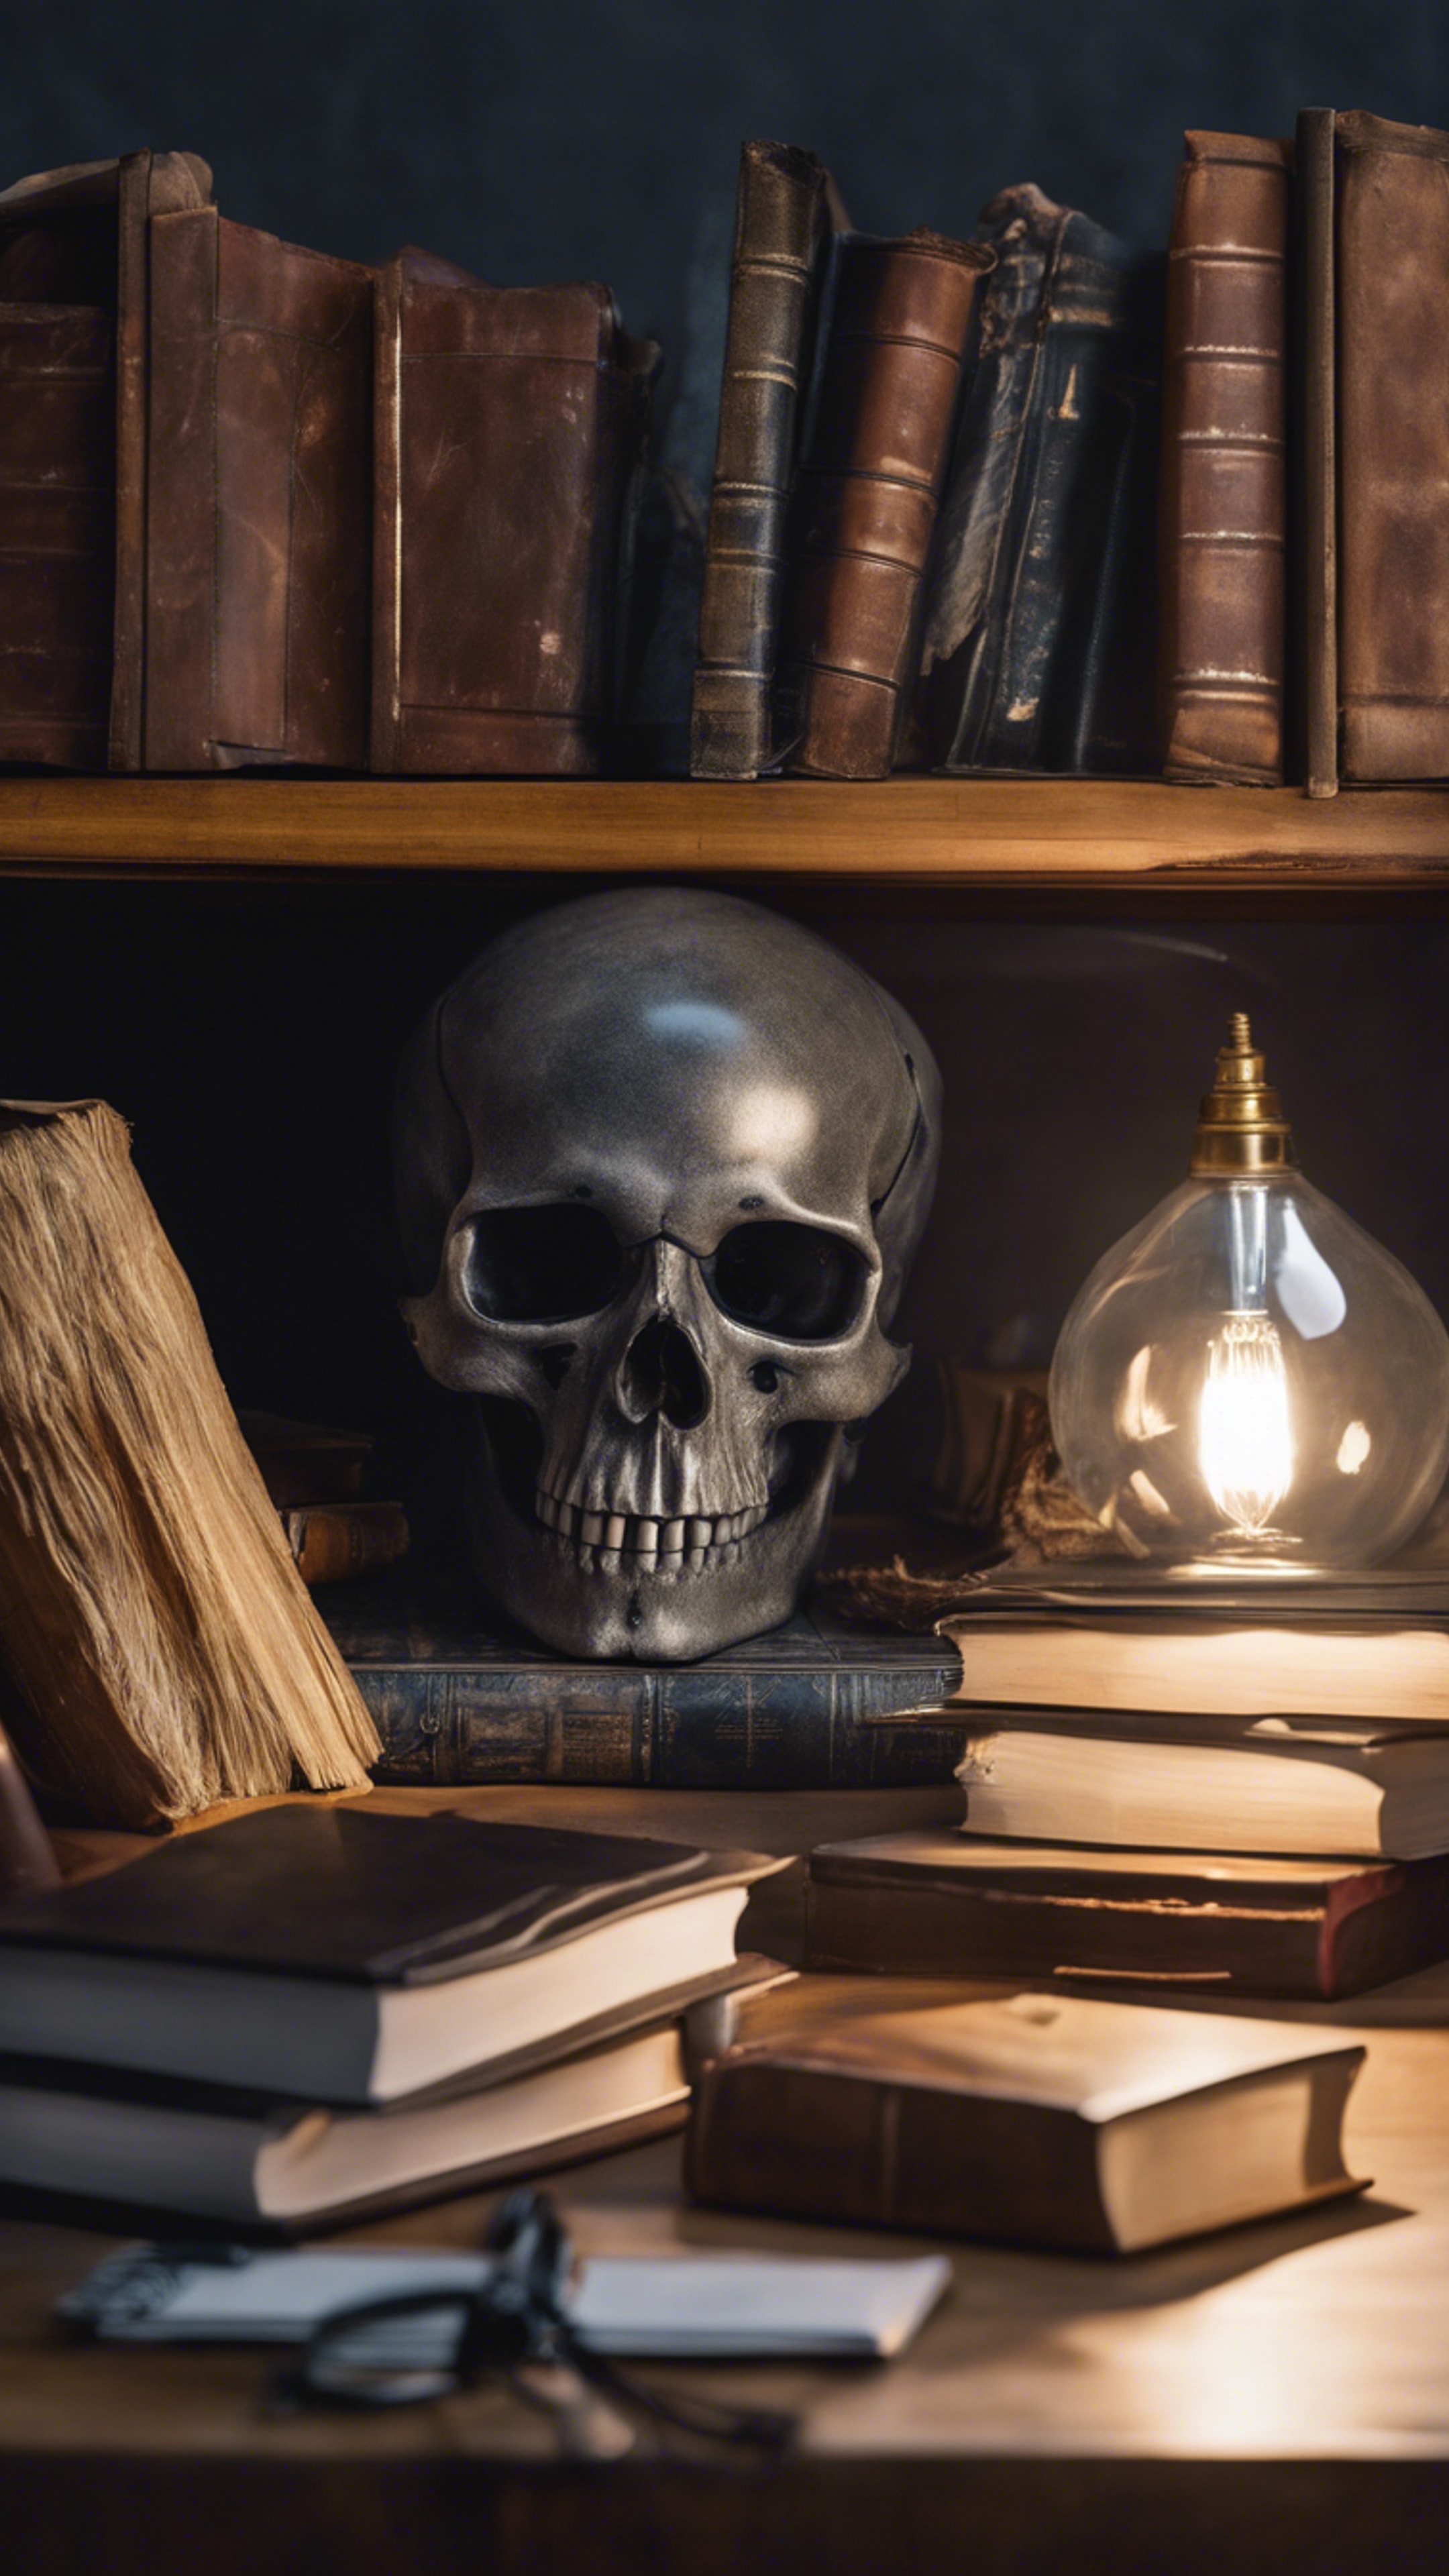 A study desk with a gray skull paperweight, surrounded by scattered books and a dimly lit lamp. Taustakuva[9ada7a5adc764debb4f2]